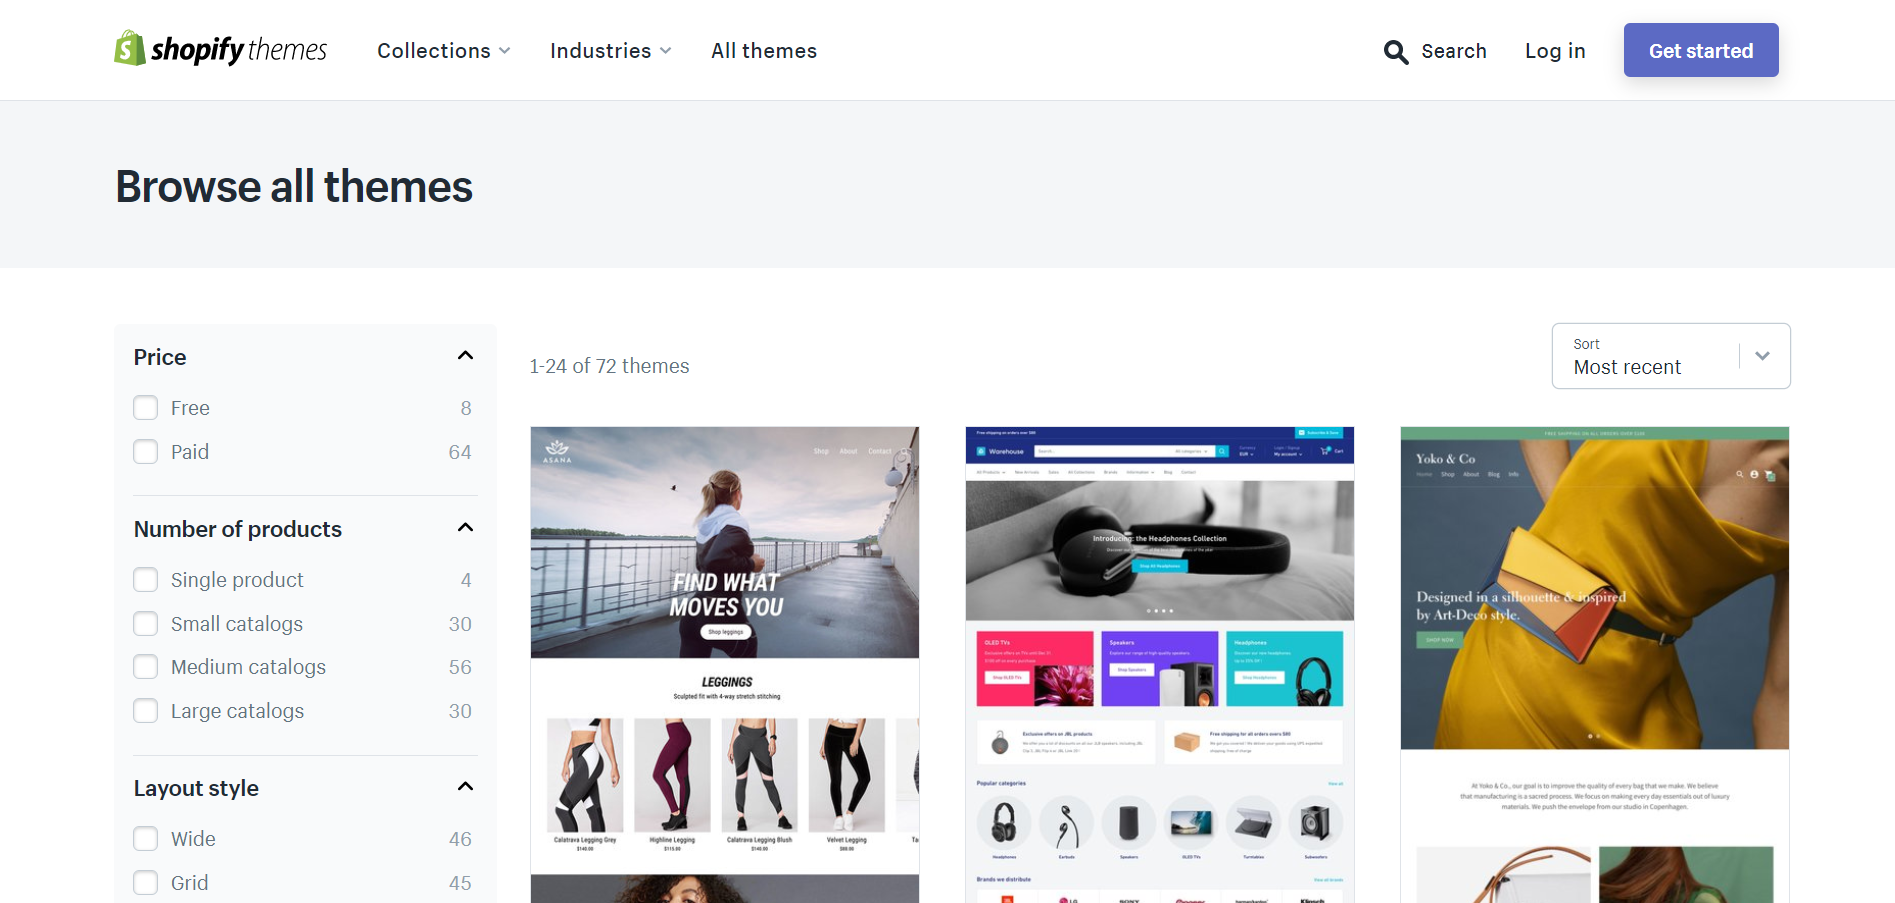 The shopify themes page